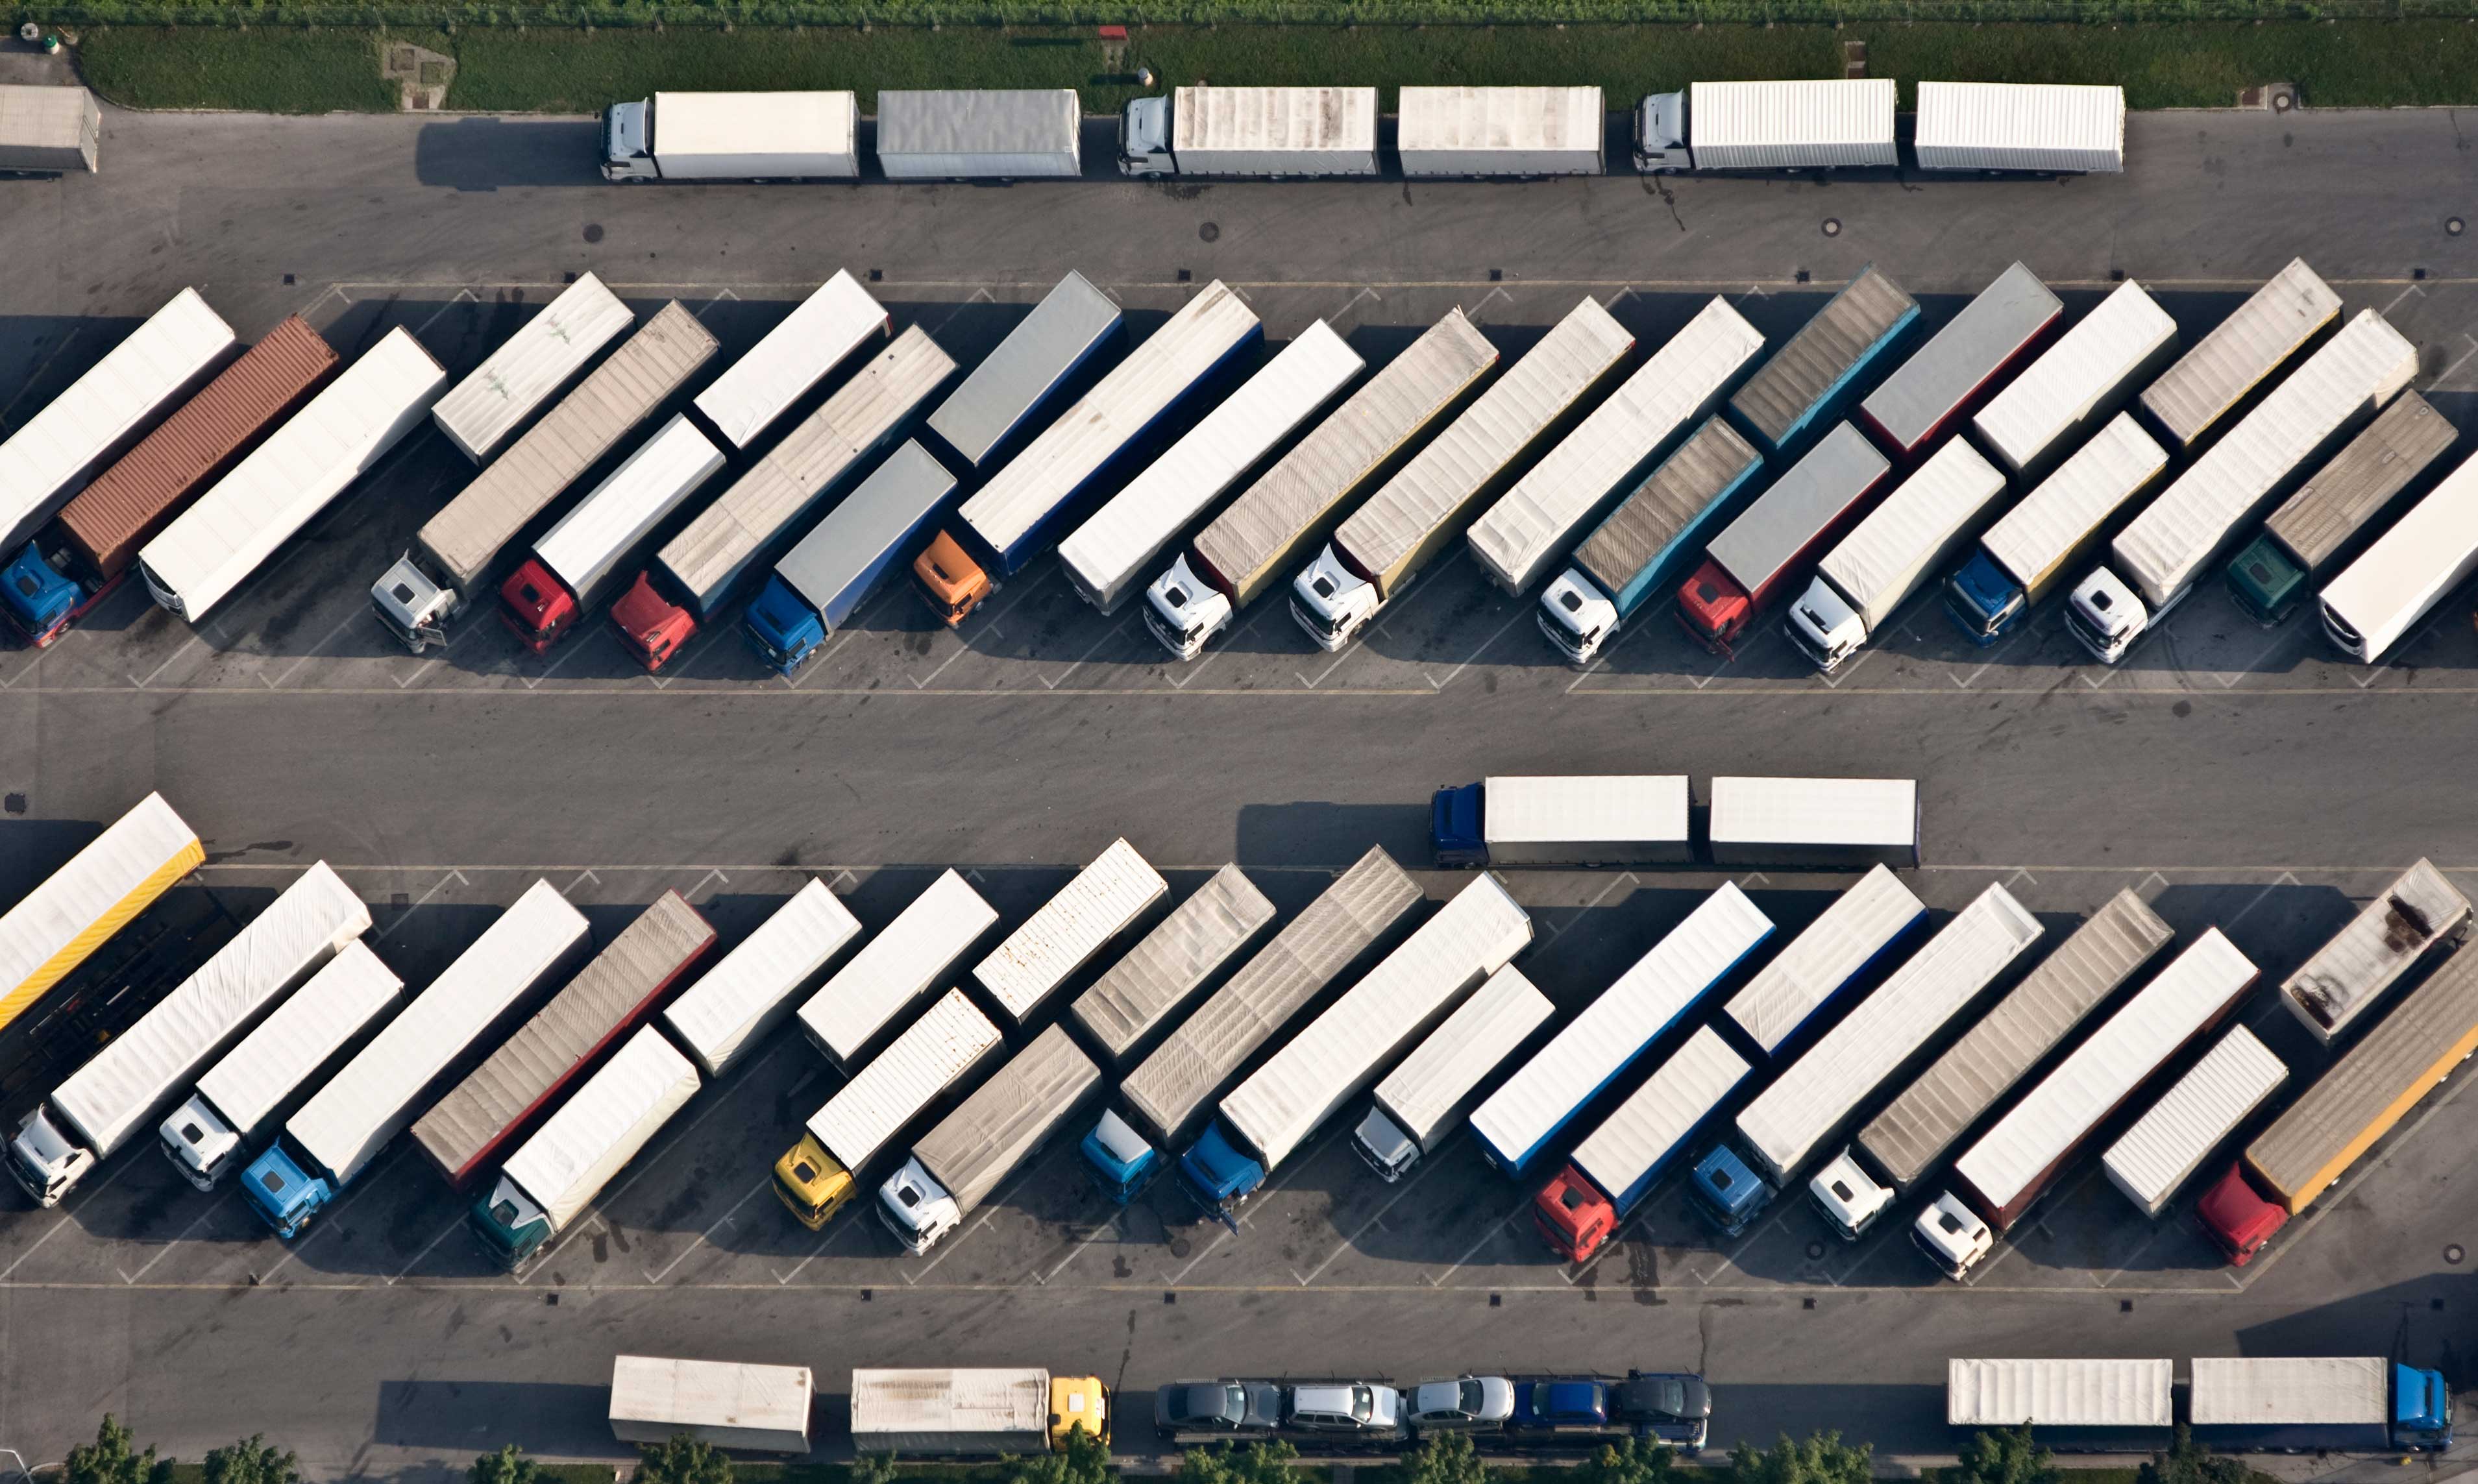 Lorry depot from above